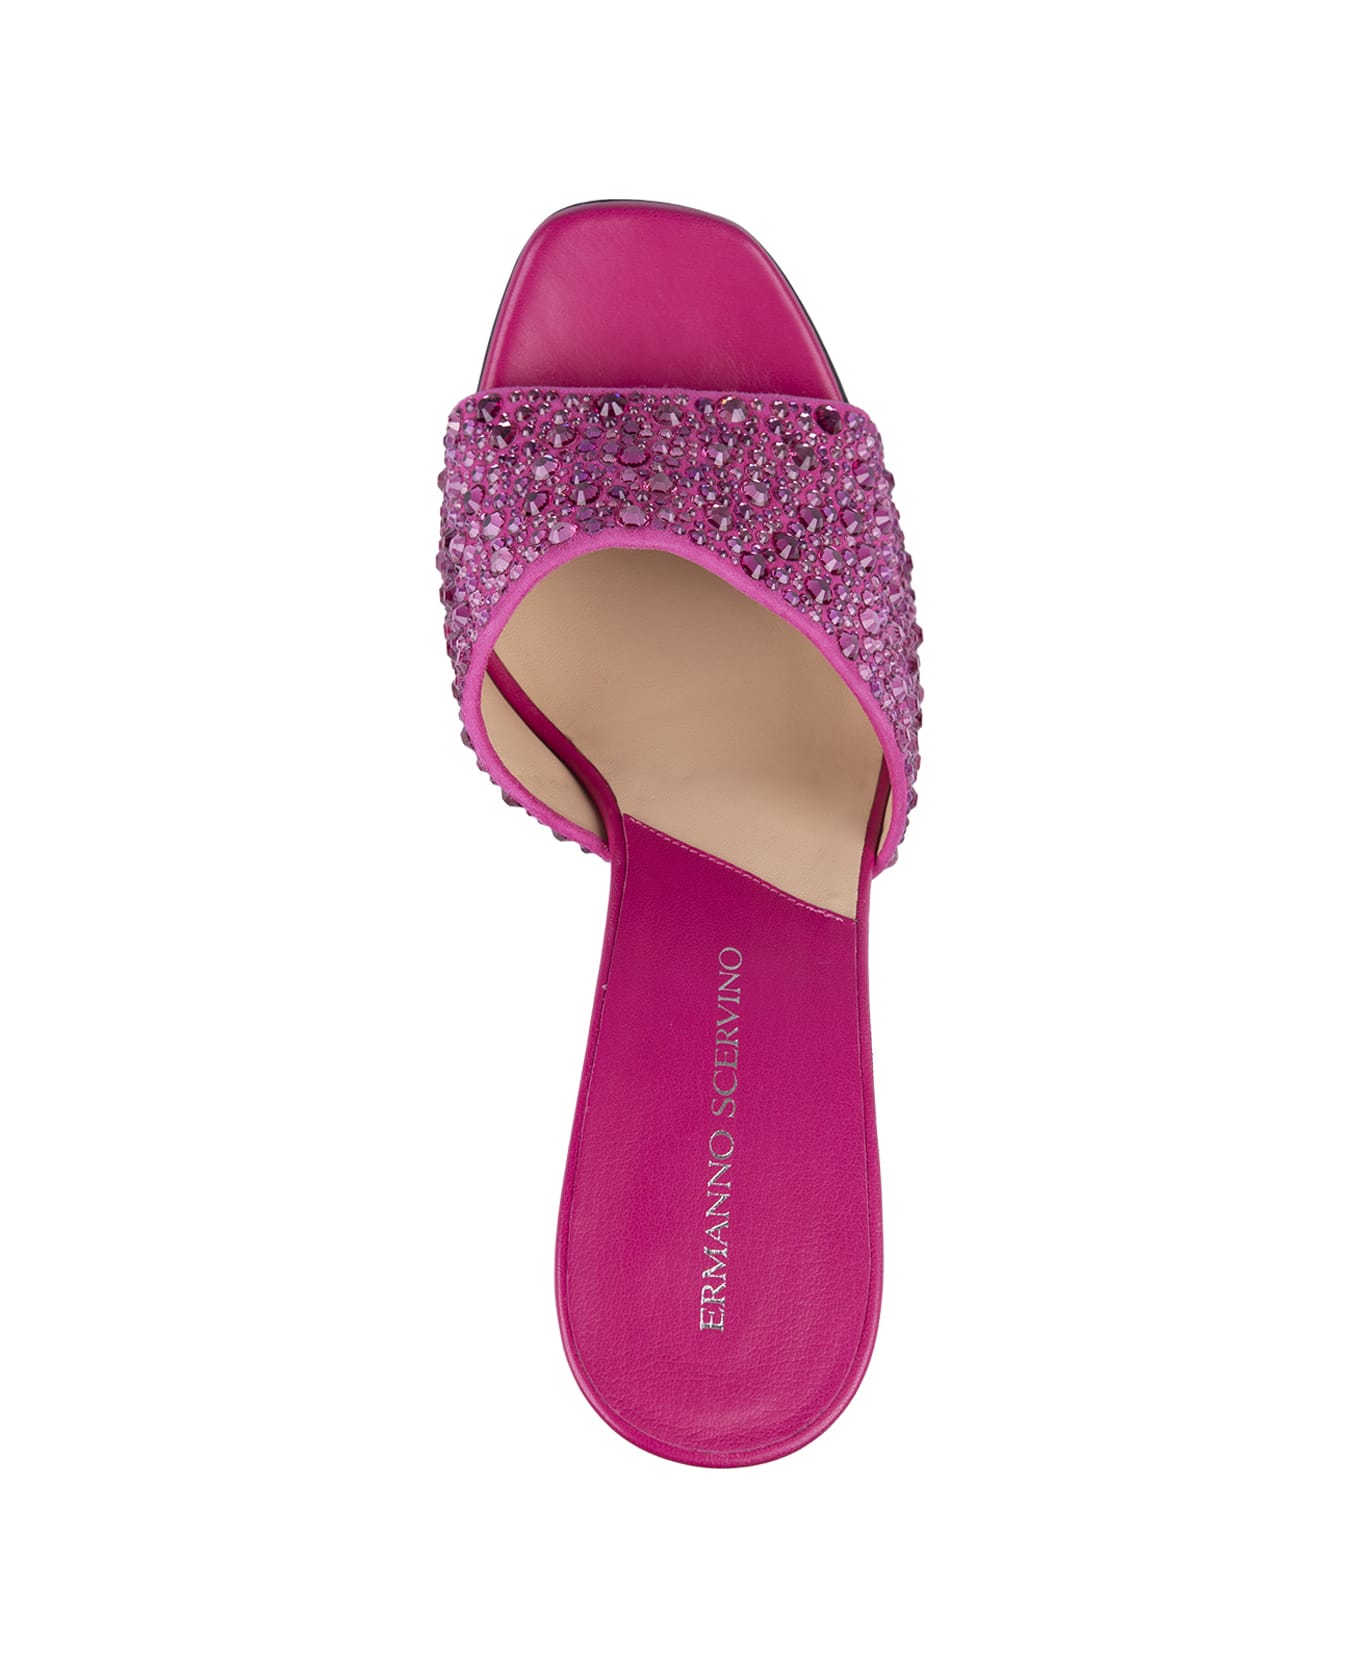 Ermanno Scervino Fuchsia Mules With Crystals - Pink